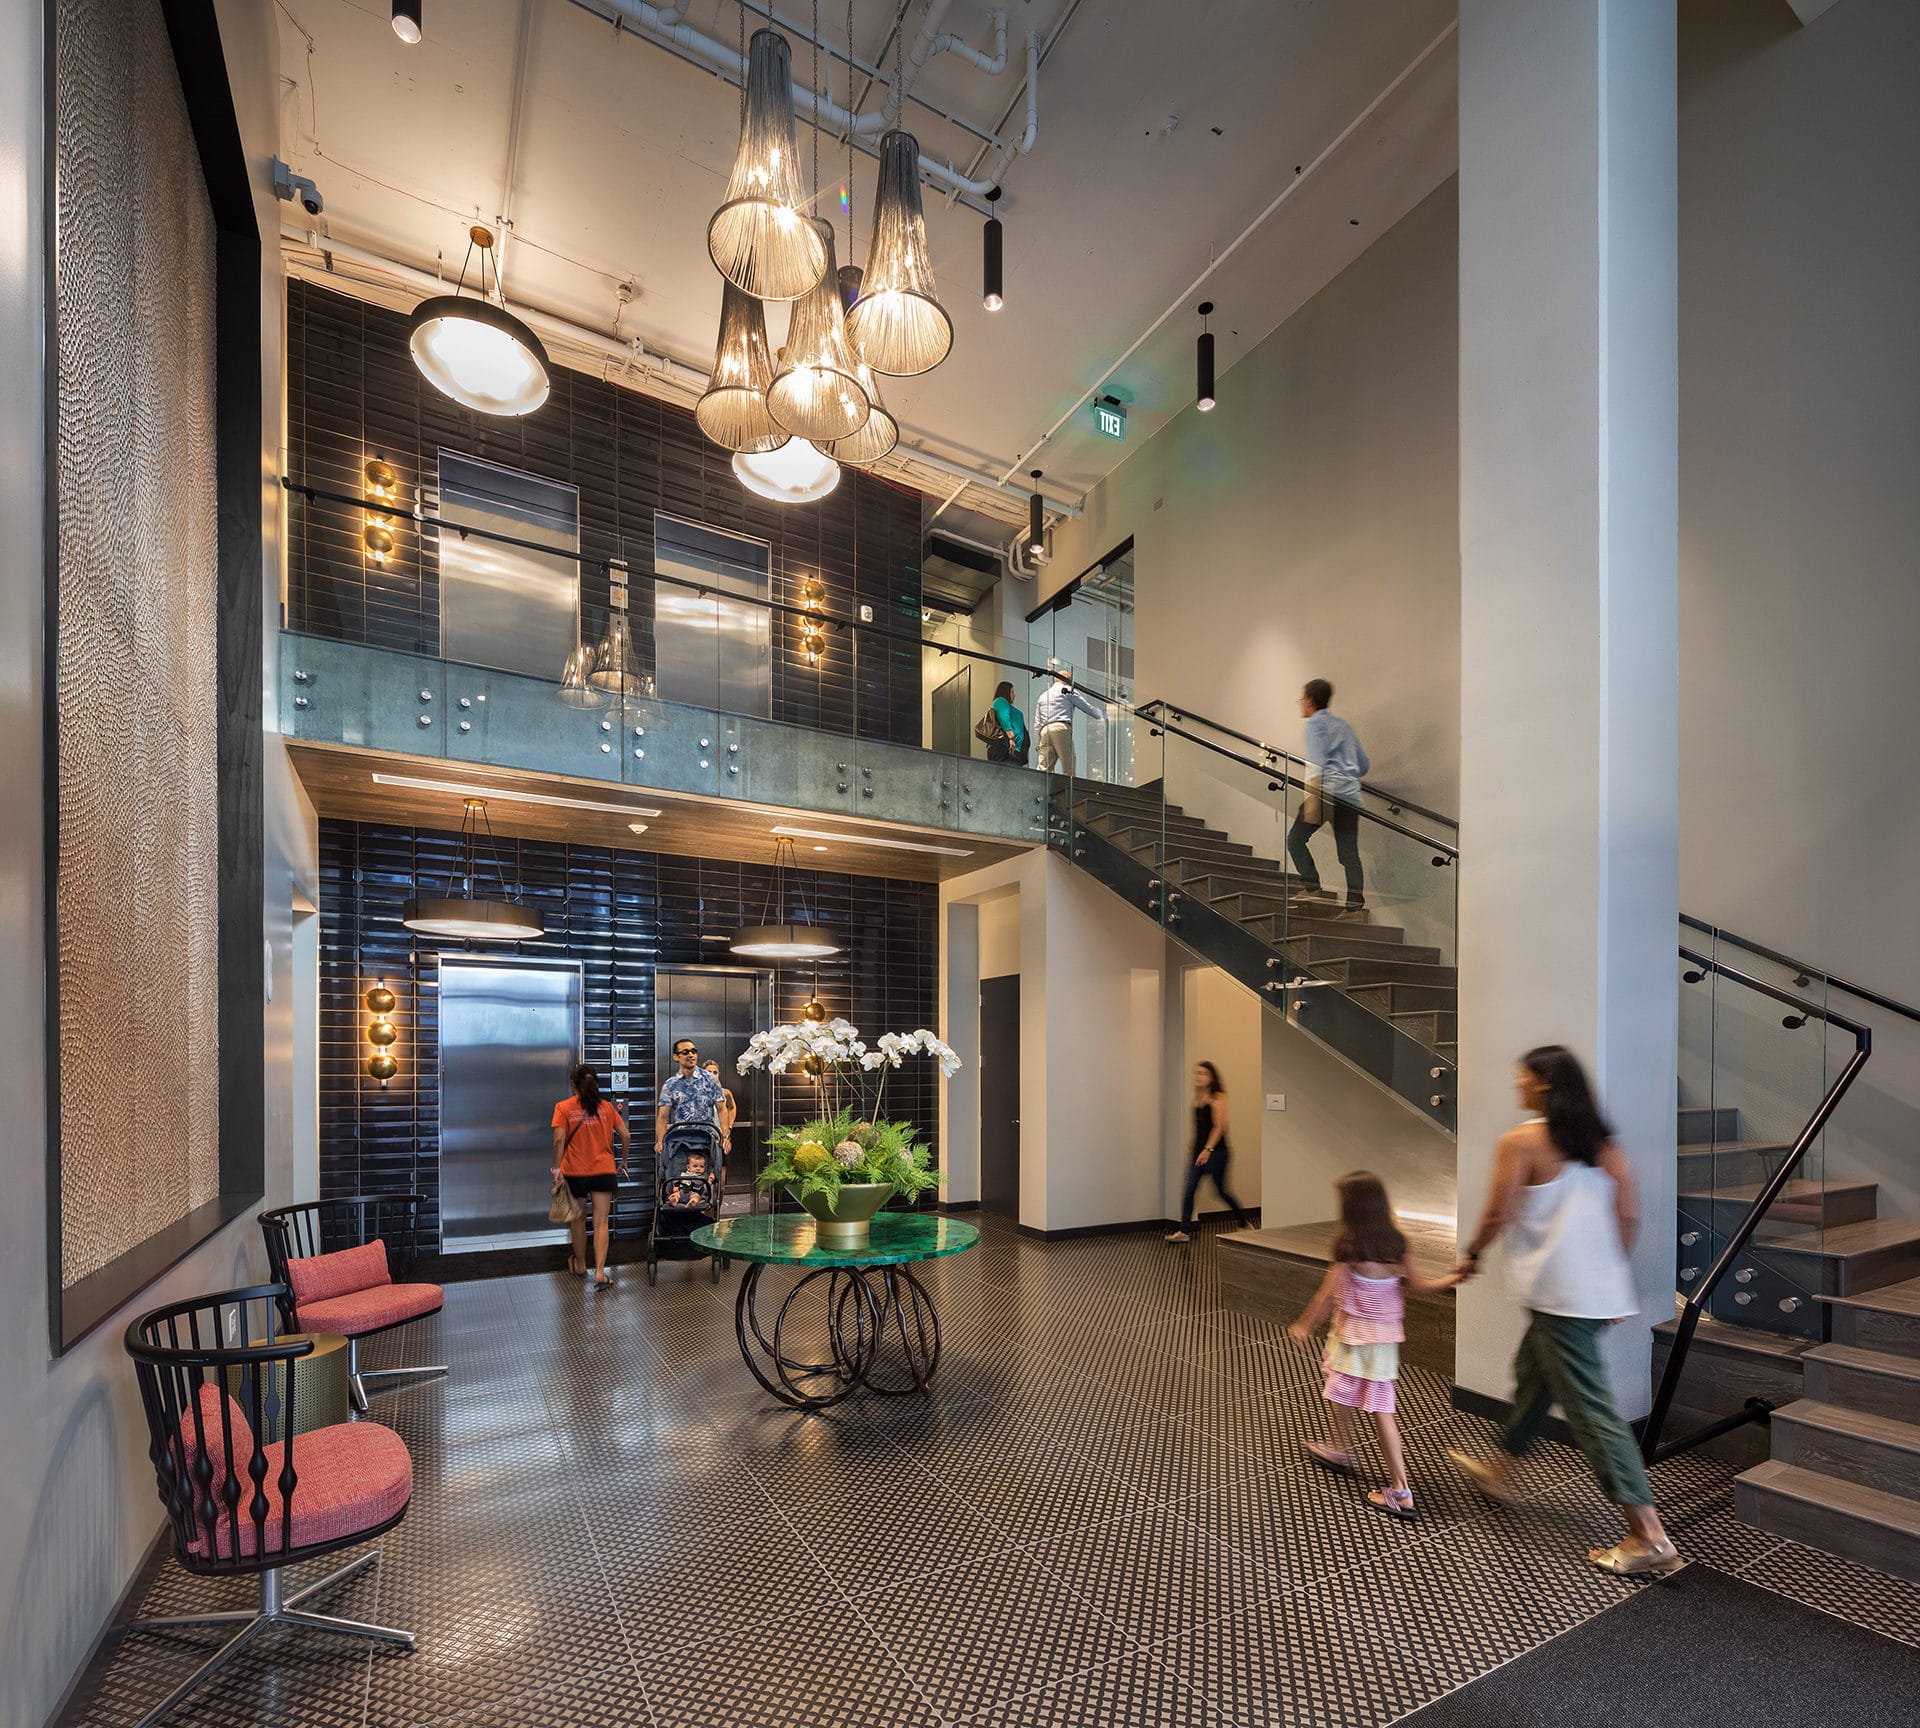 euclid loft lobby designed by trivers architectural firm in st. louis